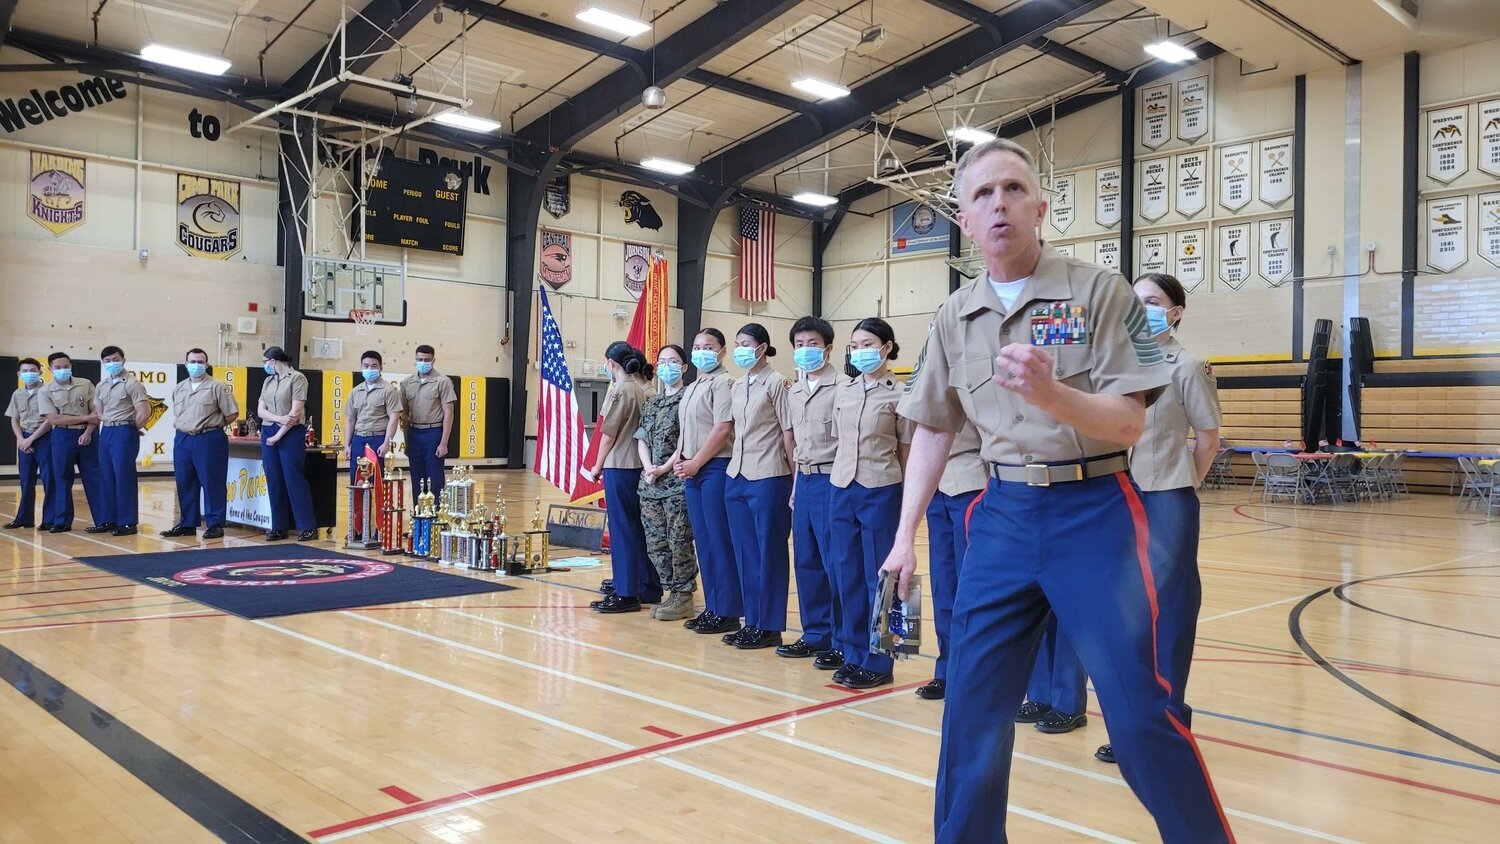 Seniors in the JROTC scholarship ceremony wore masks as Sgt. Major James Kirkland spoke about COVID-19 challenges experienced on the path to graduation. (Photo submitted)